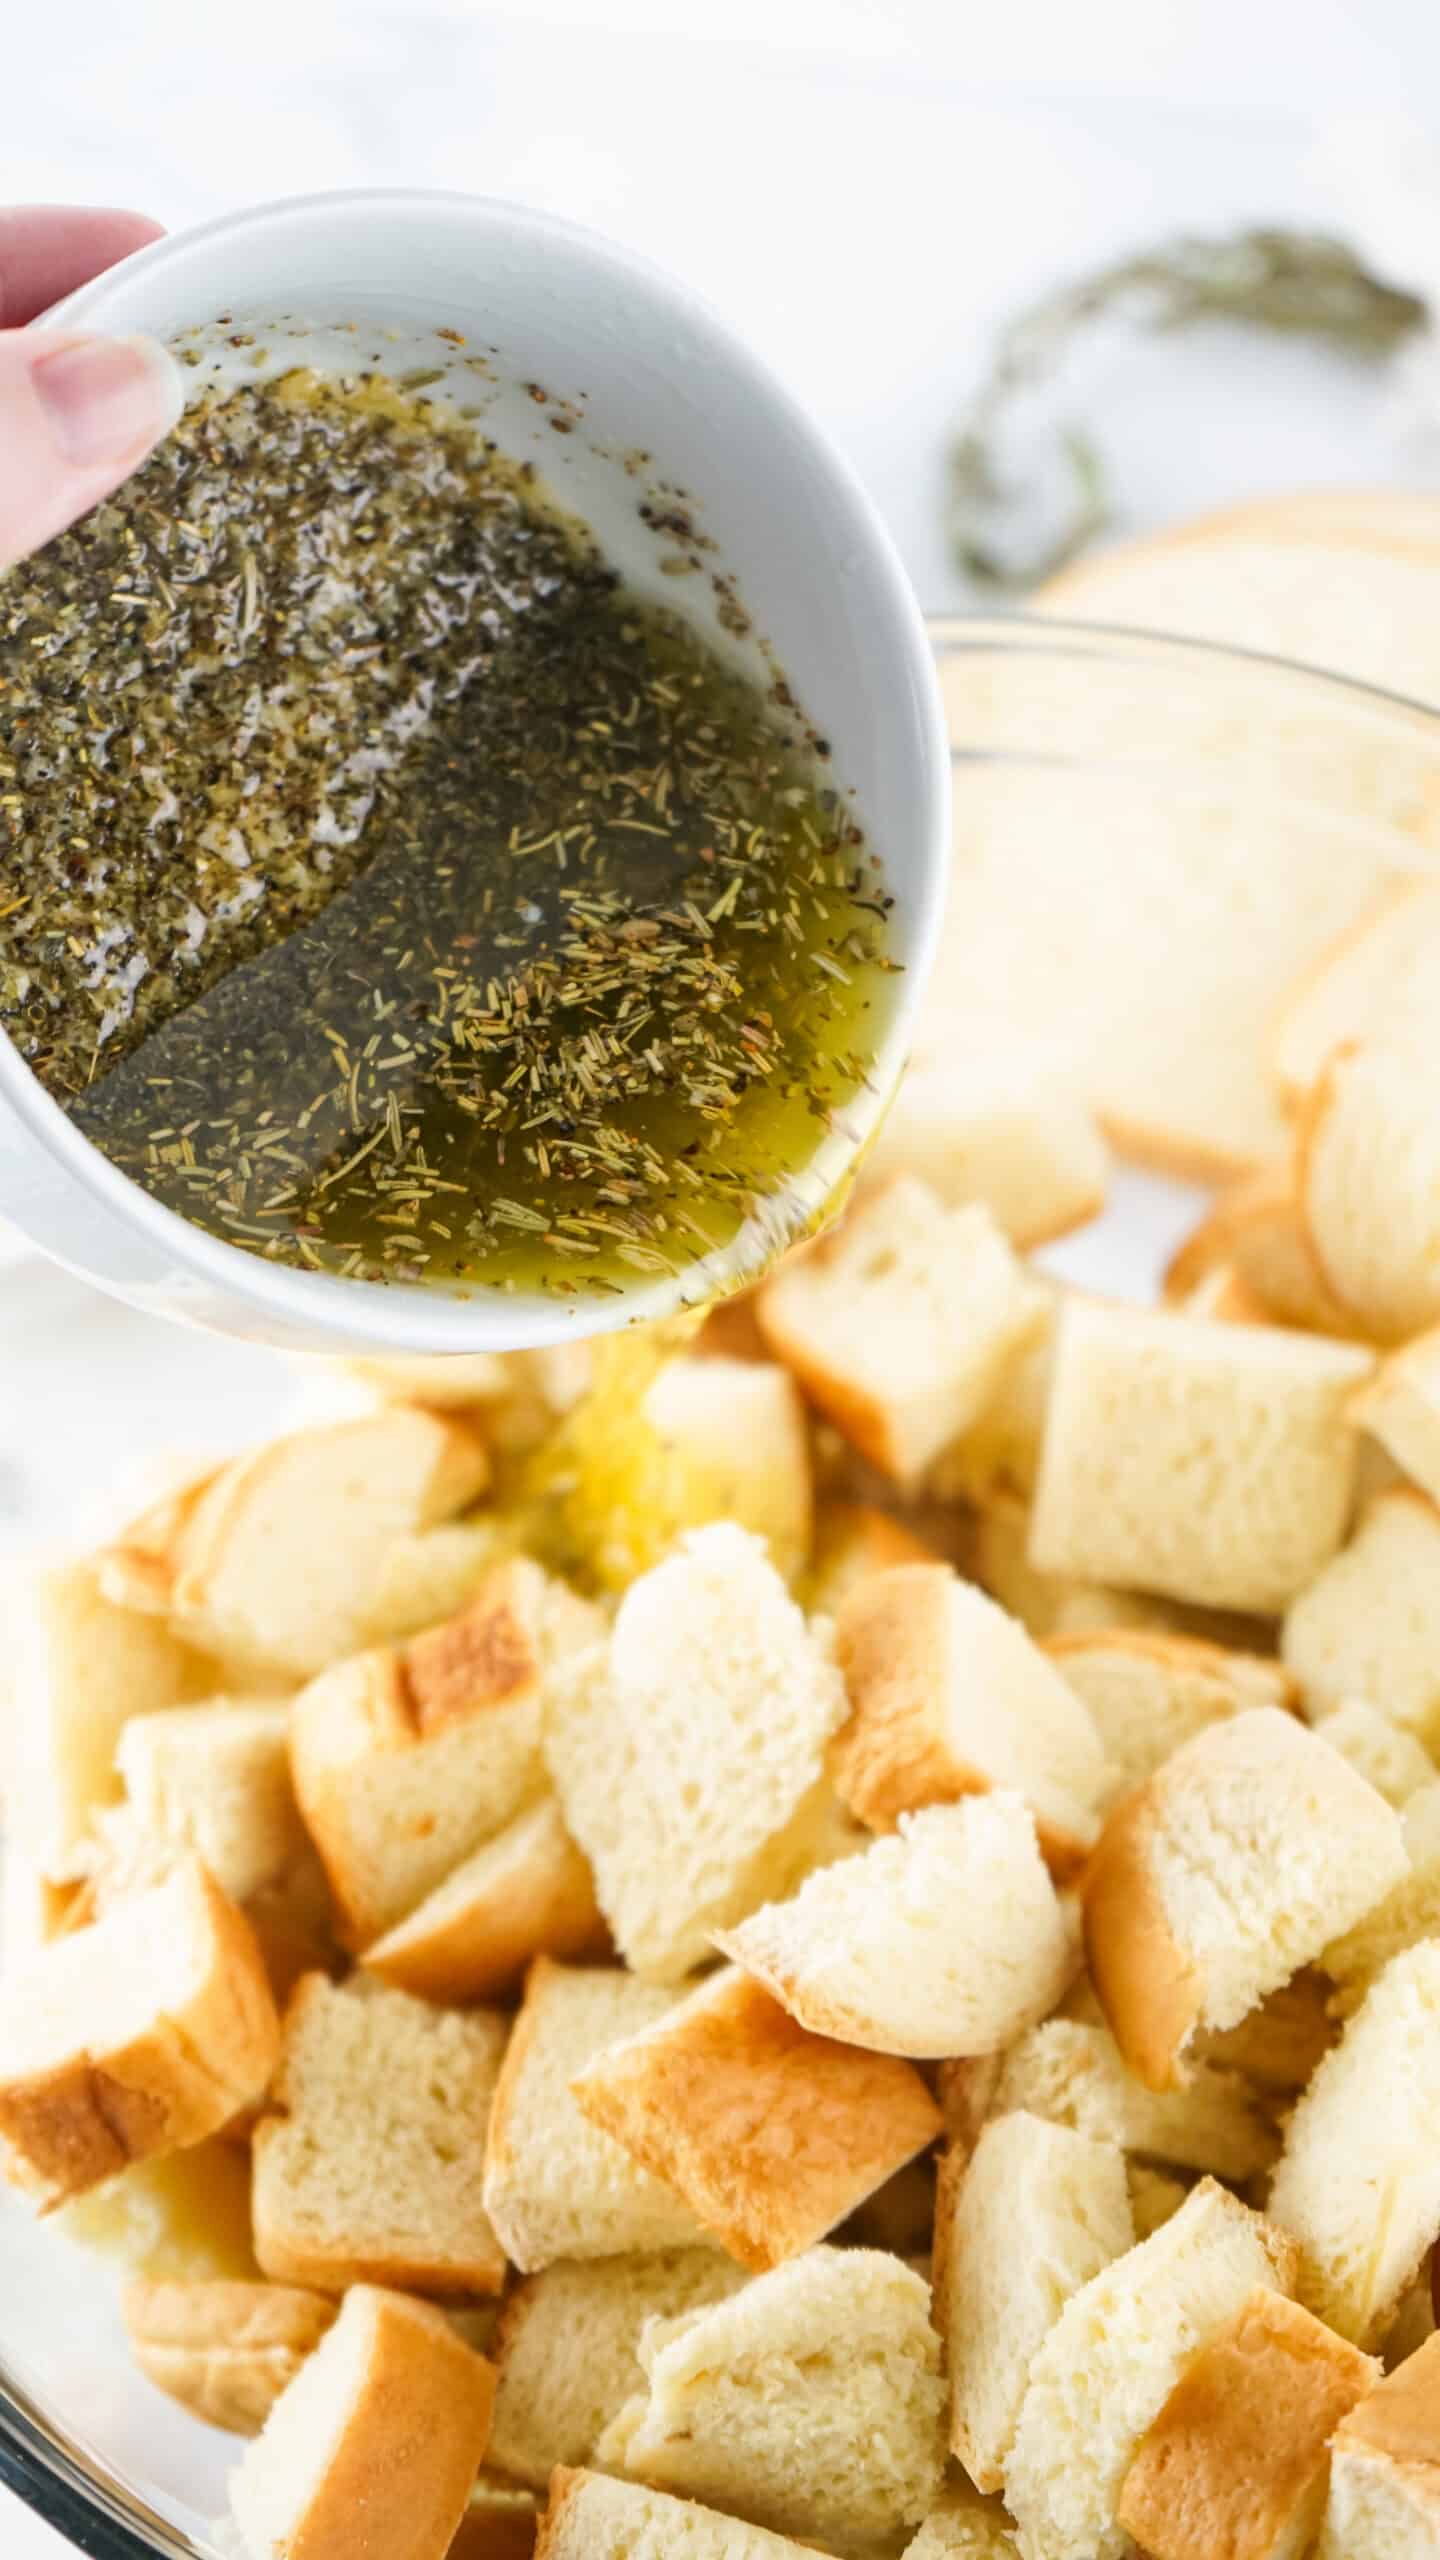 melted butter and seasonings being poured over cubed bread for homemade croutons